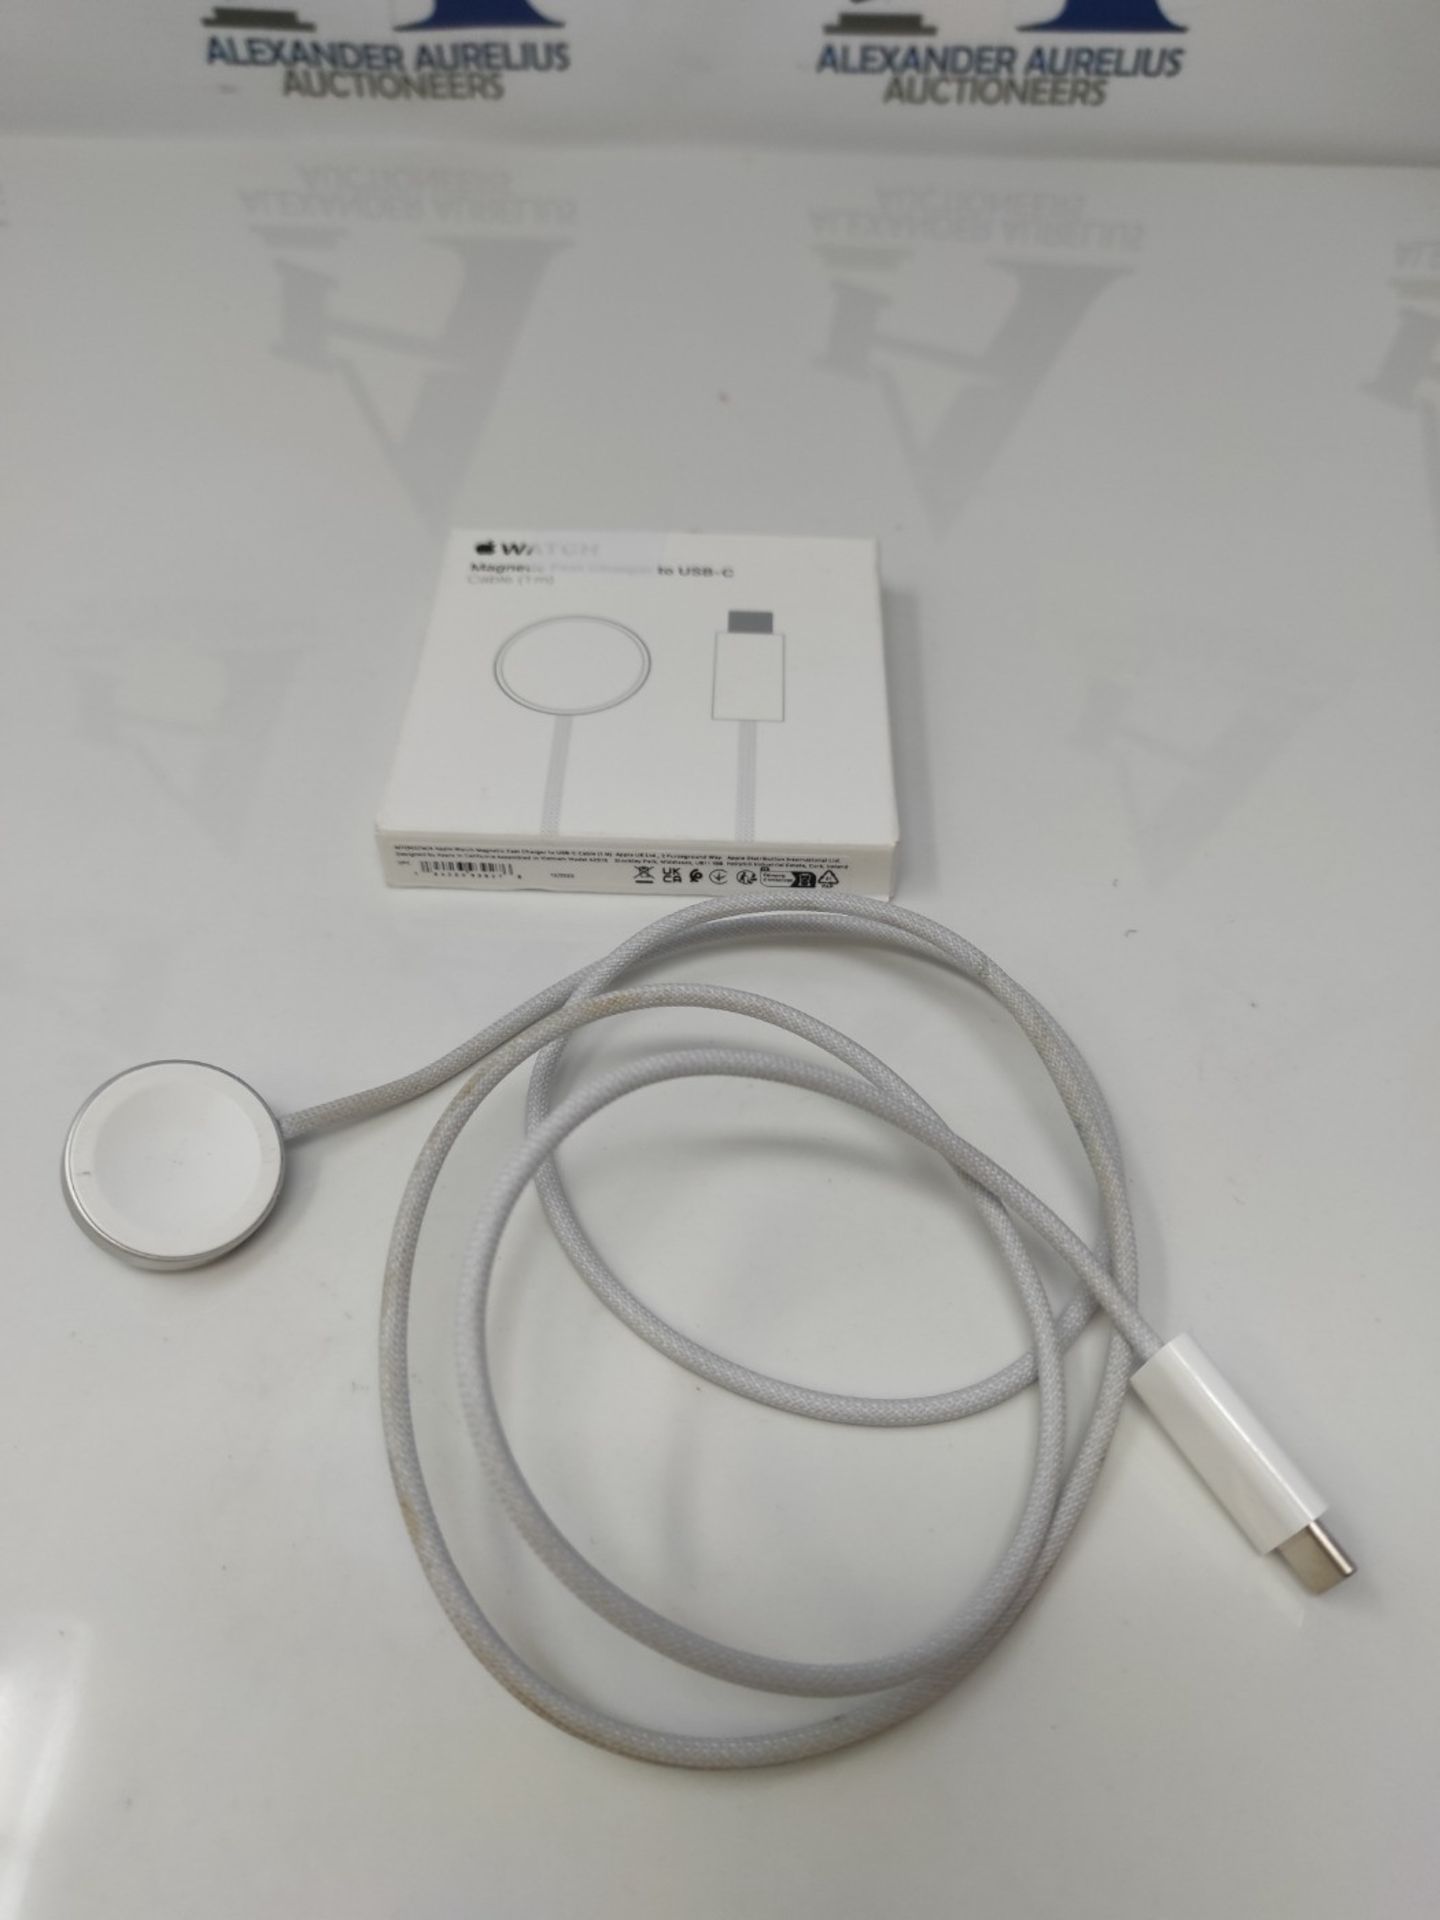 Apple Watch Magnetic Fast Charger to USB-C Cable (1 m) - Image 2 of 2